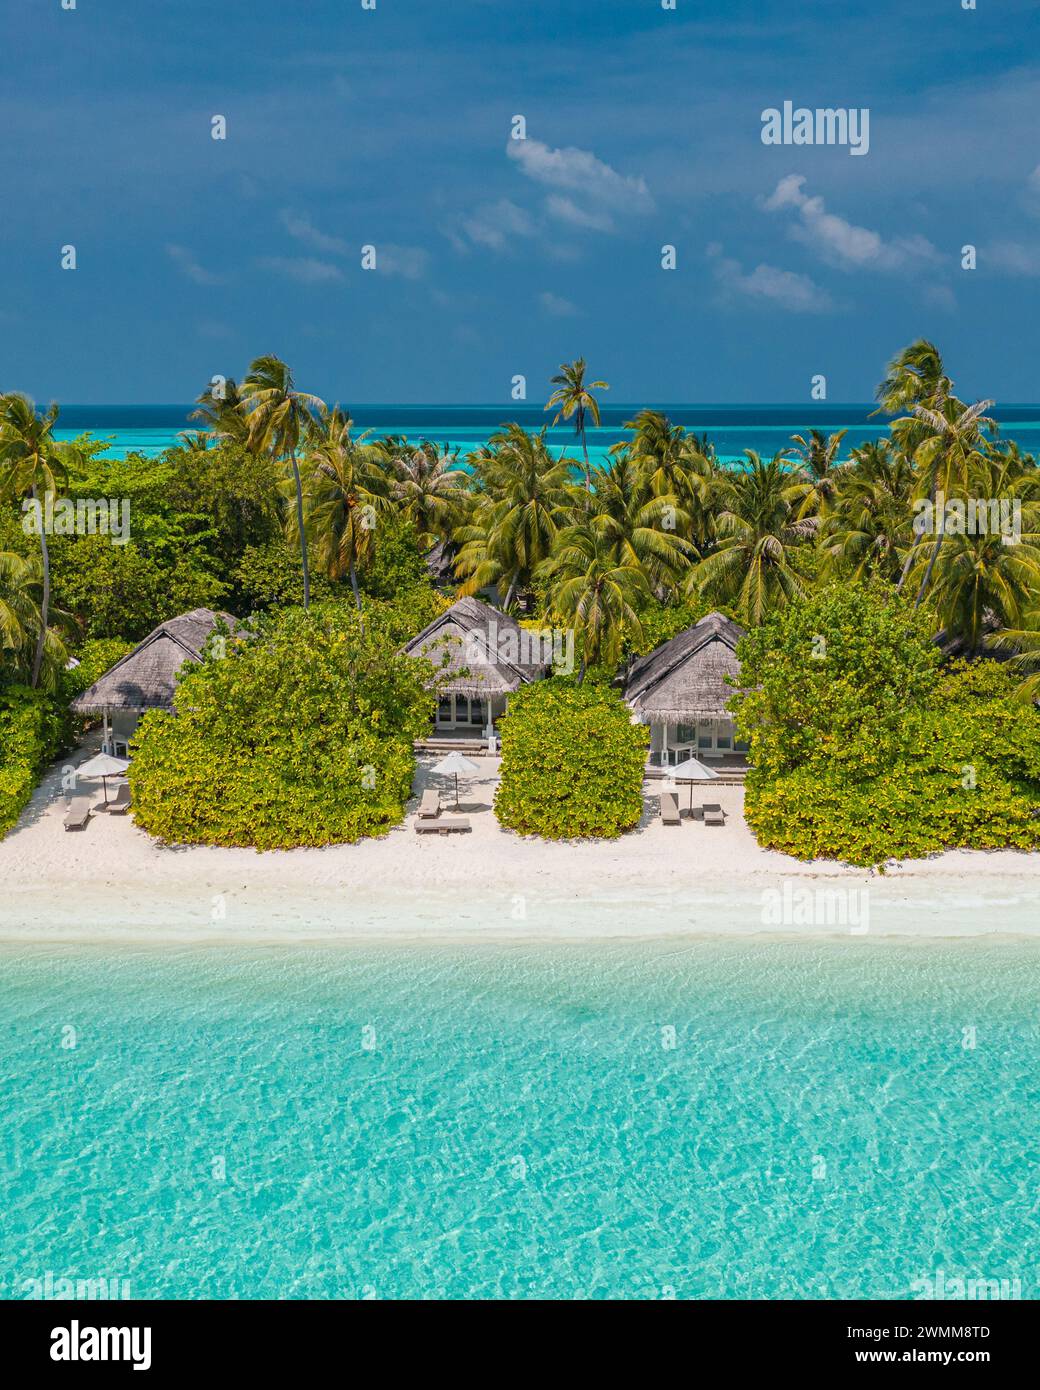 Amazing atoll island in Maldives luxury villas from aerial view. Tranquil tropical landscape seascape. Palm trees white sandy beach, peaceful nature Stock Photo